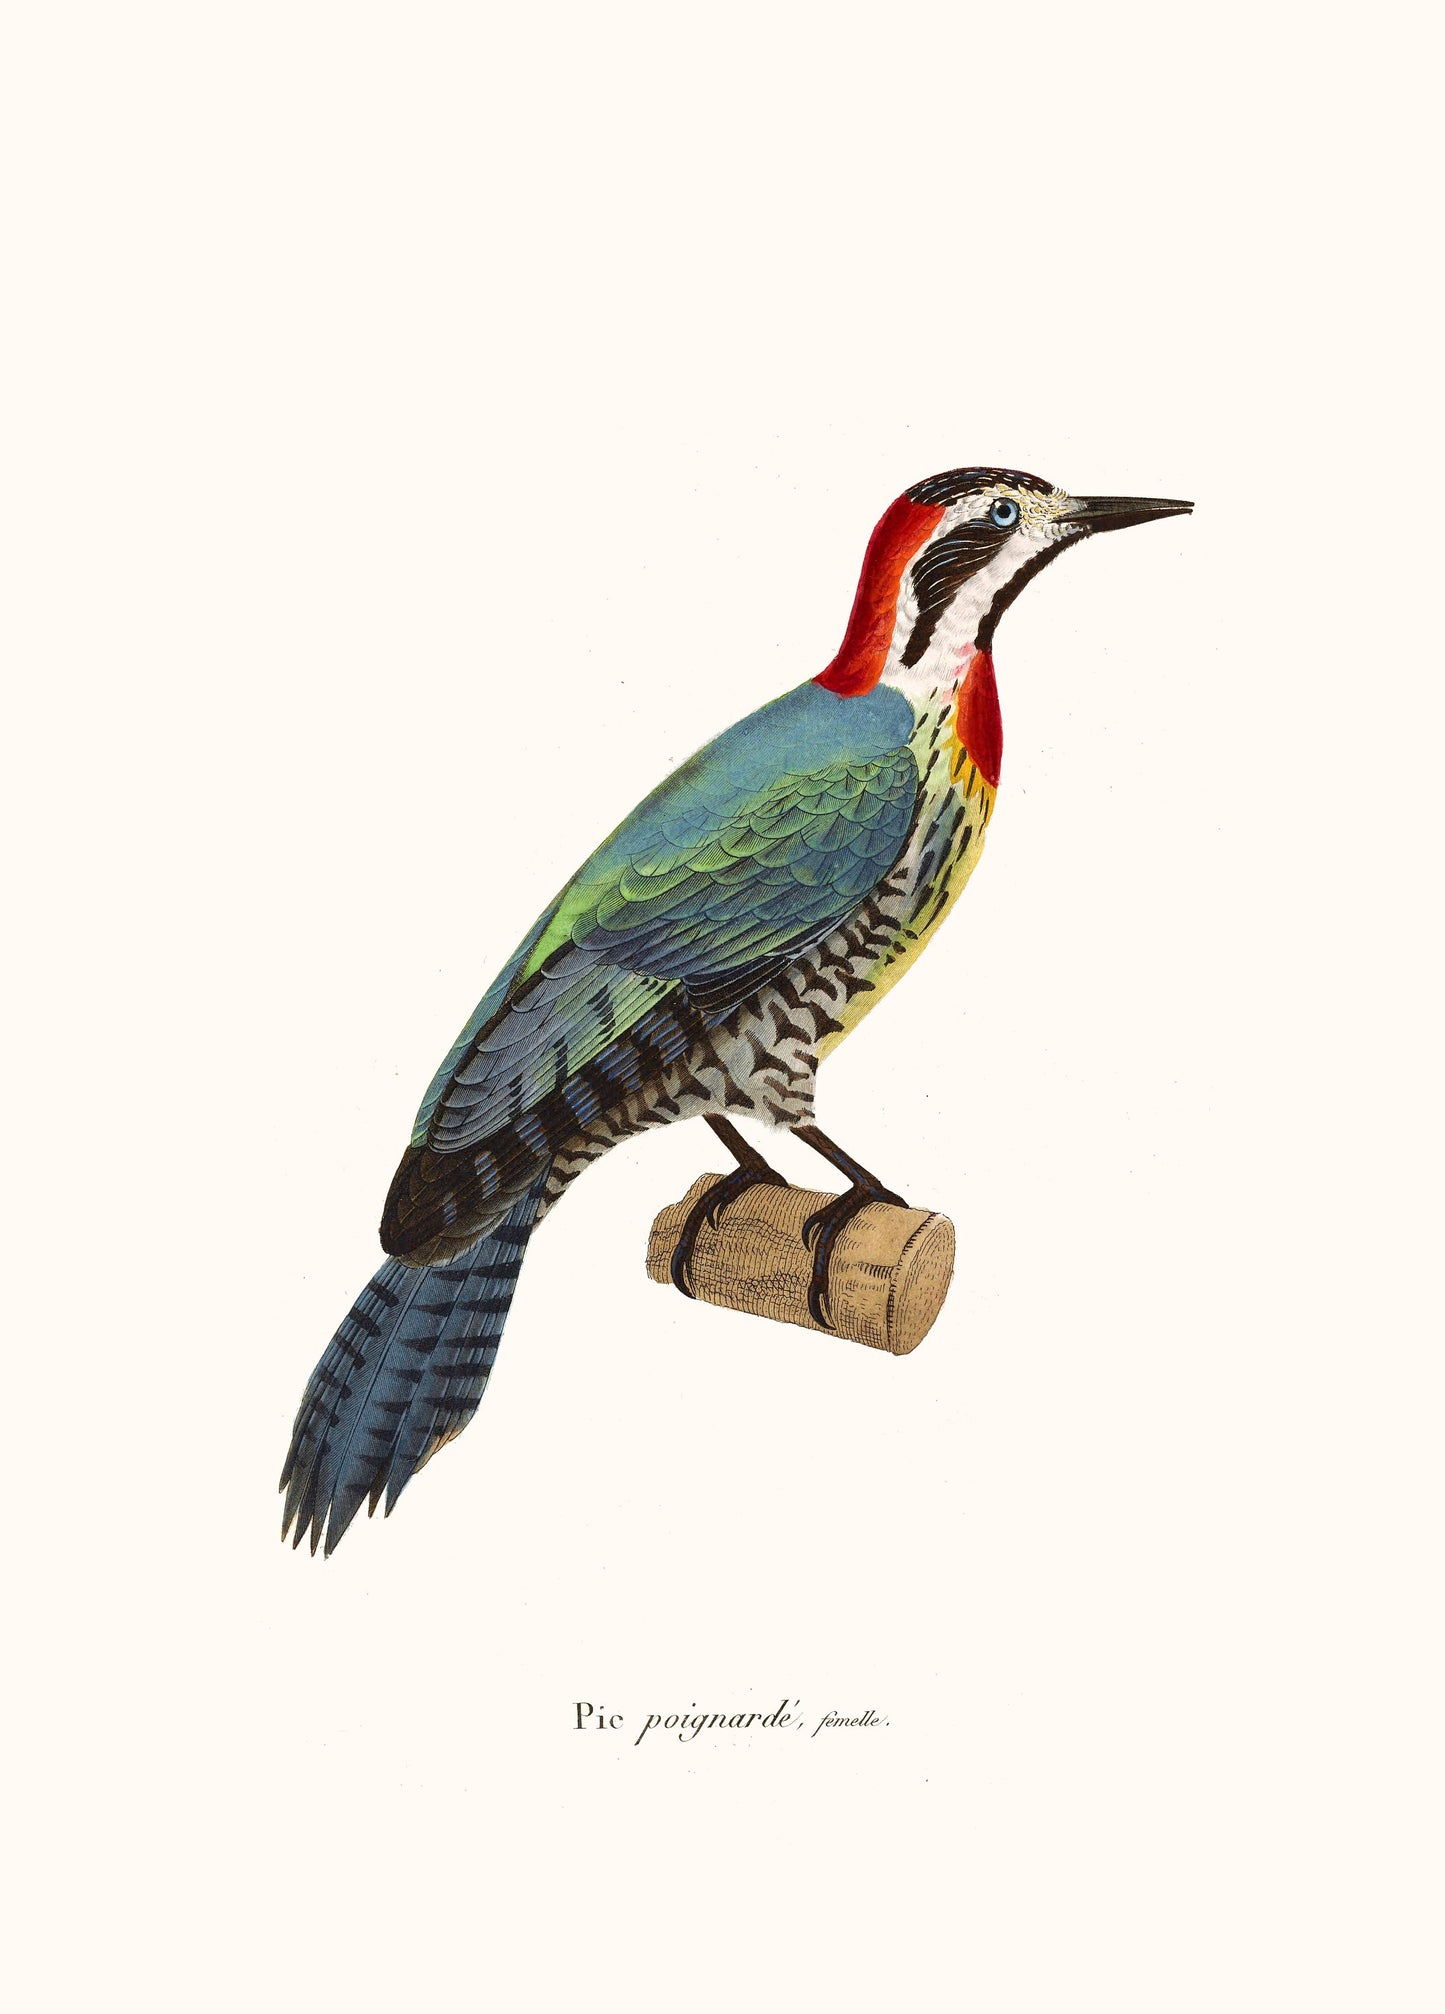 The New Collection of Painted Birds Woodpeckers [17 Images]